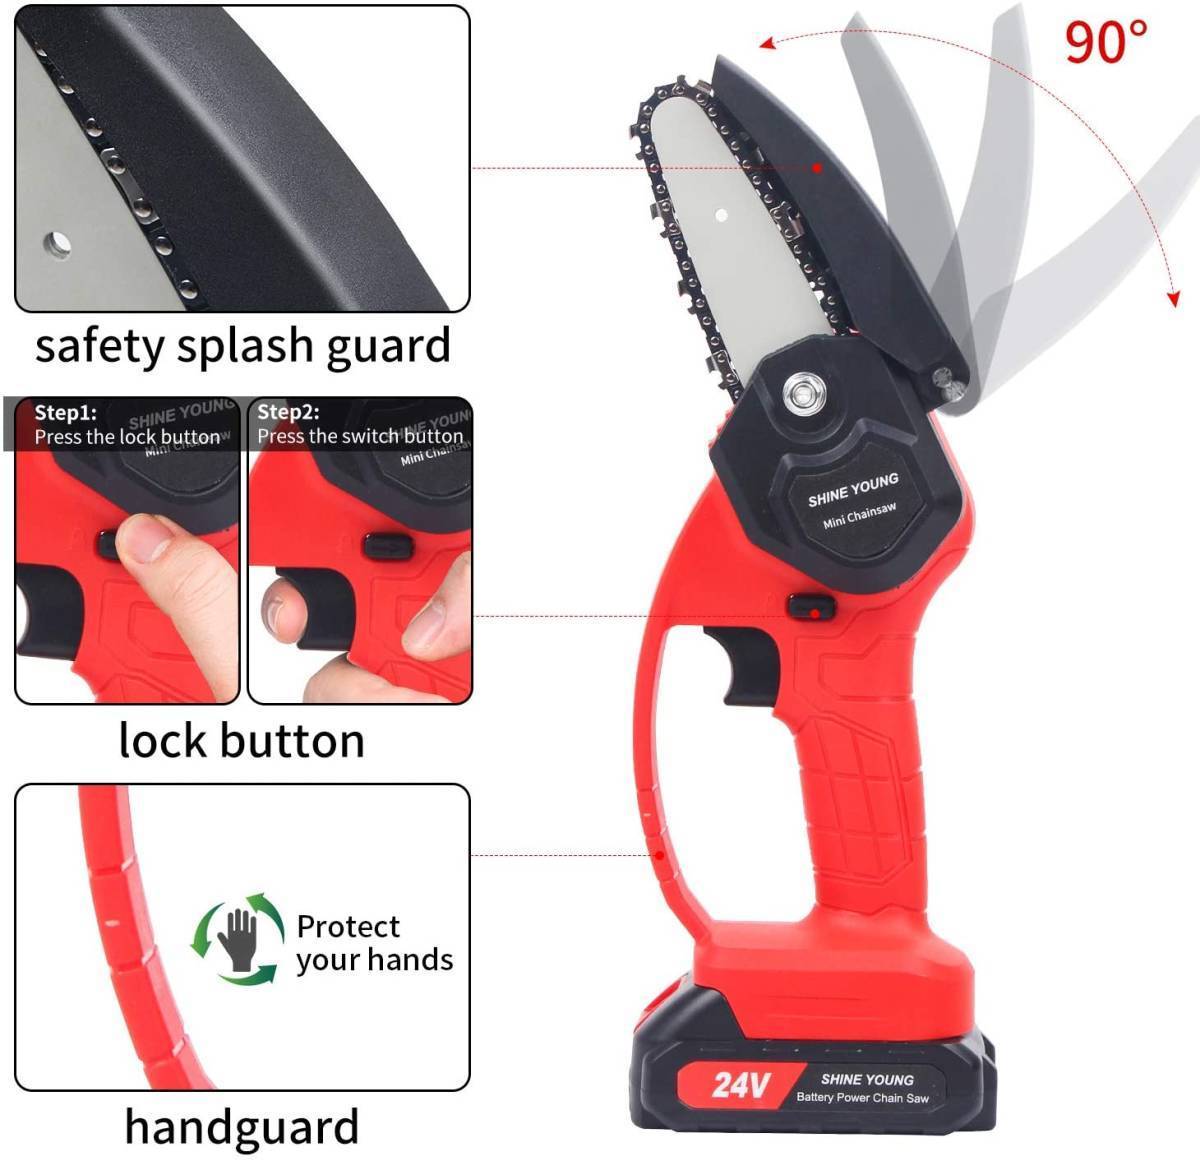  with translation rechargeable chain saw 24V light weight changer so- electric chain saw chain 2 piece battery 2 piece attaching light weight portable branch cut ... firewood making 